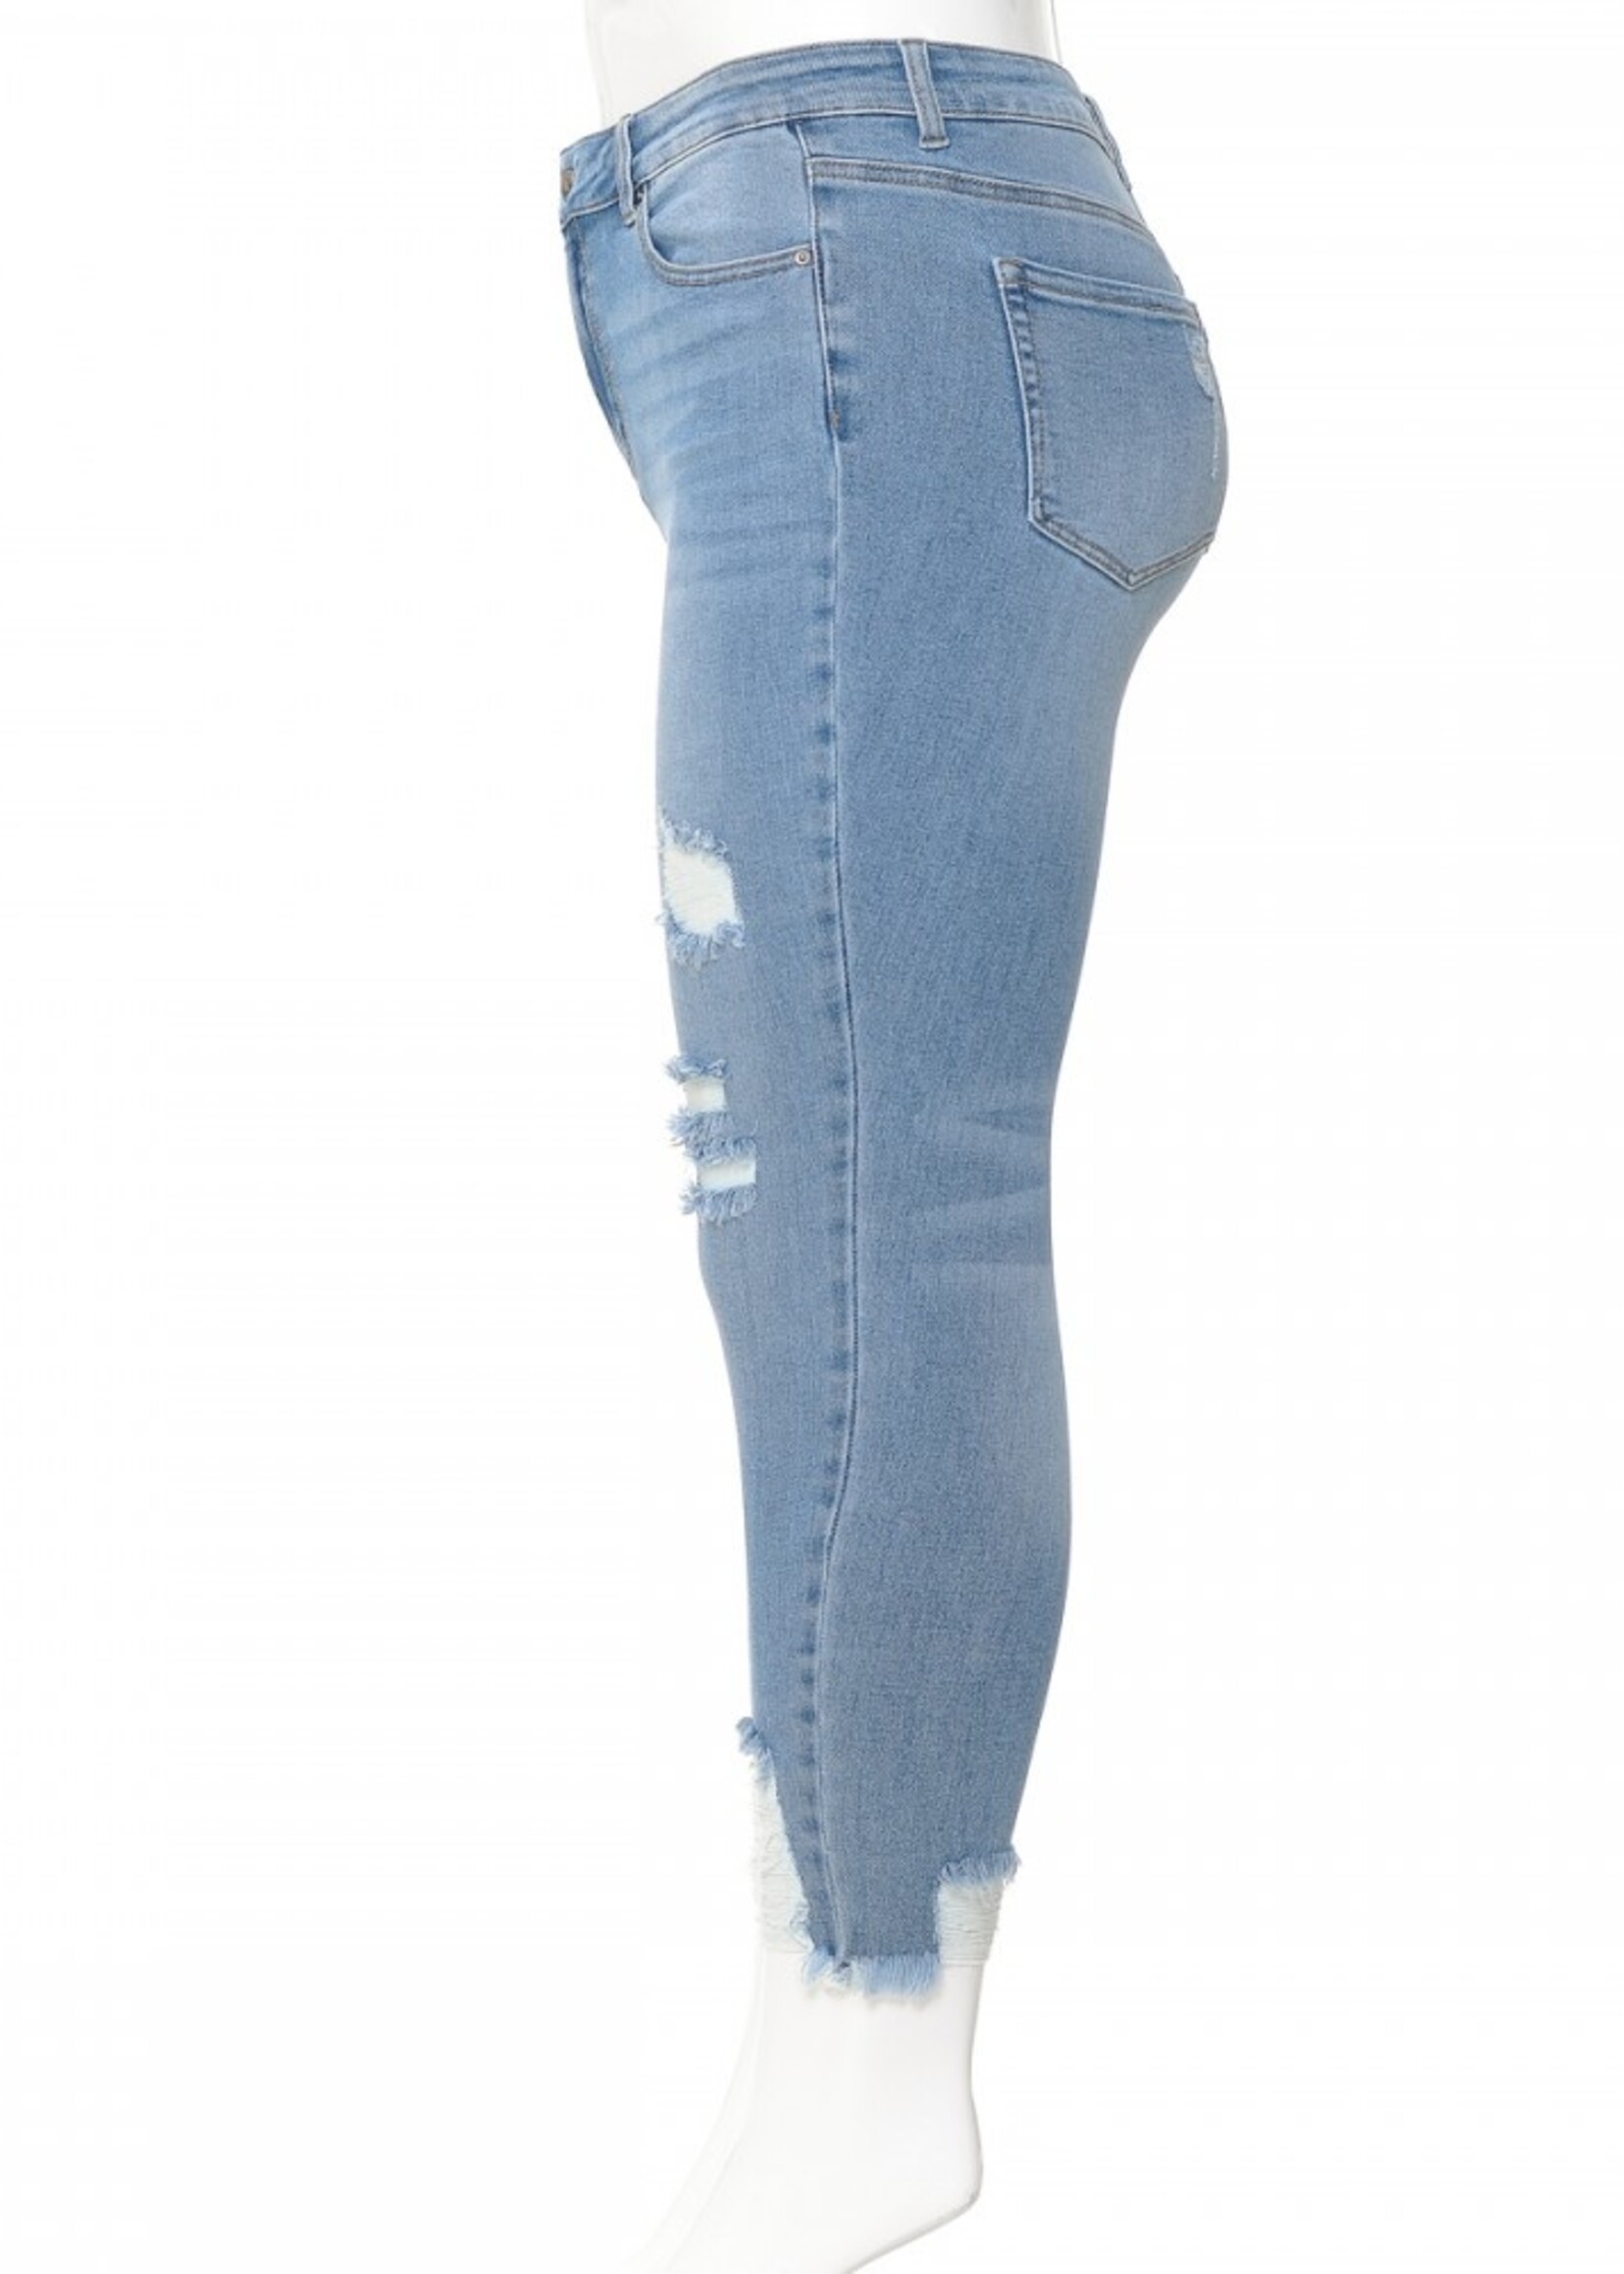 Ripped Jeans for Women, Distressed Jeans